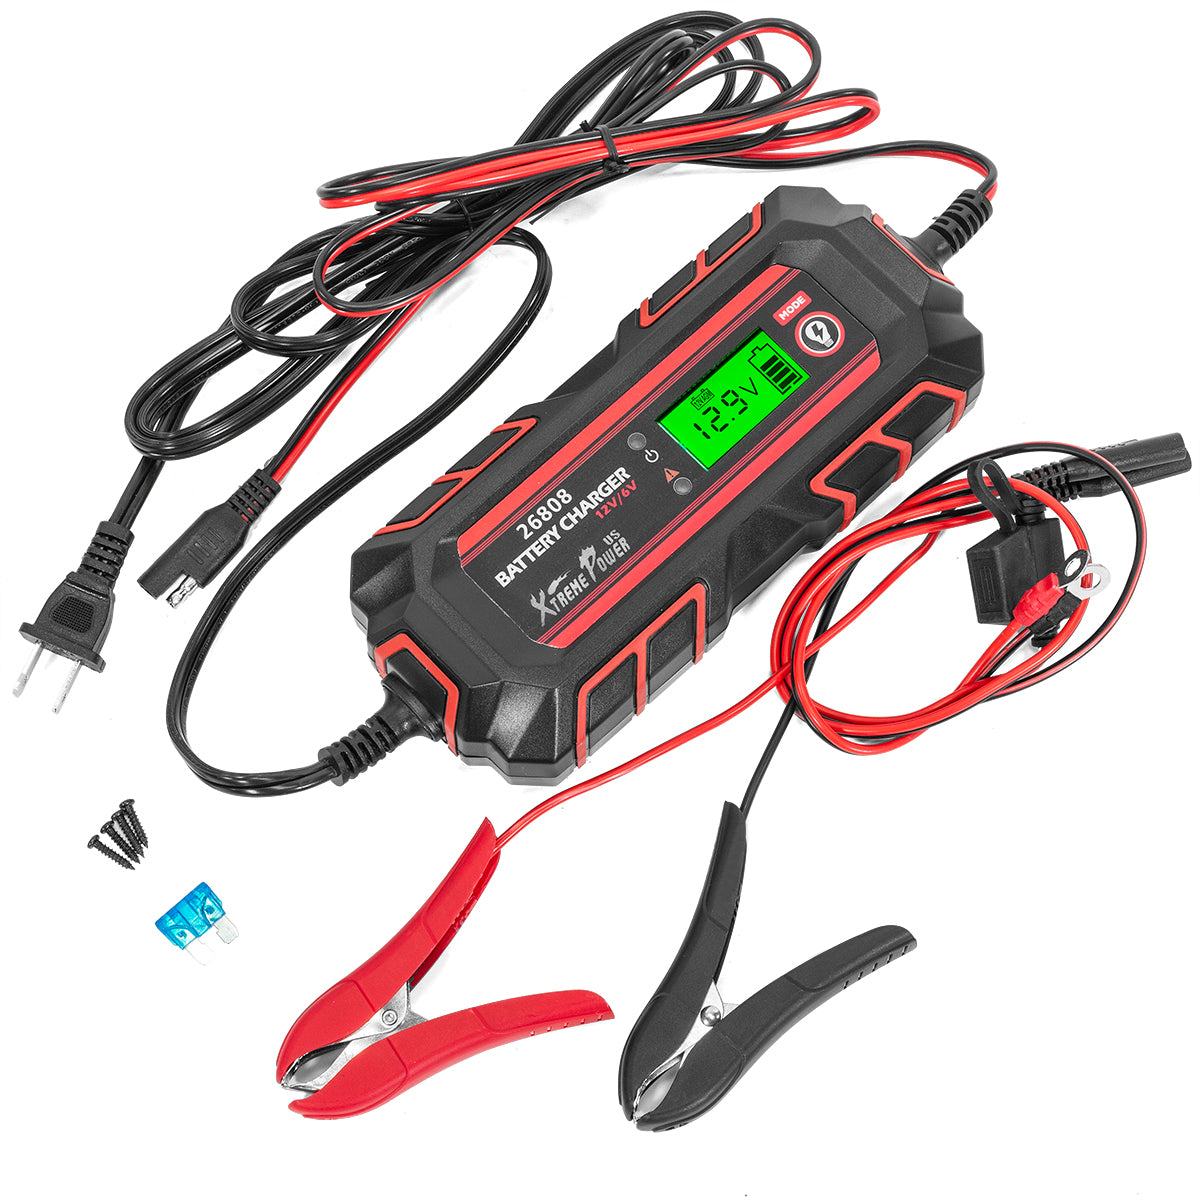 BLACK+DECKER 1.2 Amp Portable Car Battery Charger/Maintainer